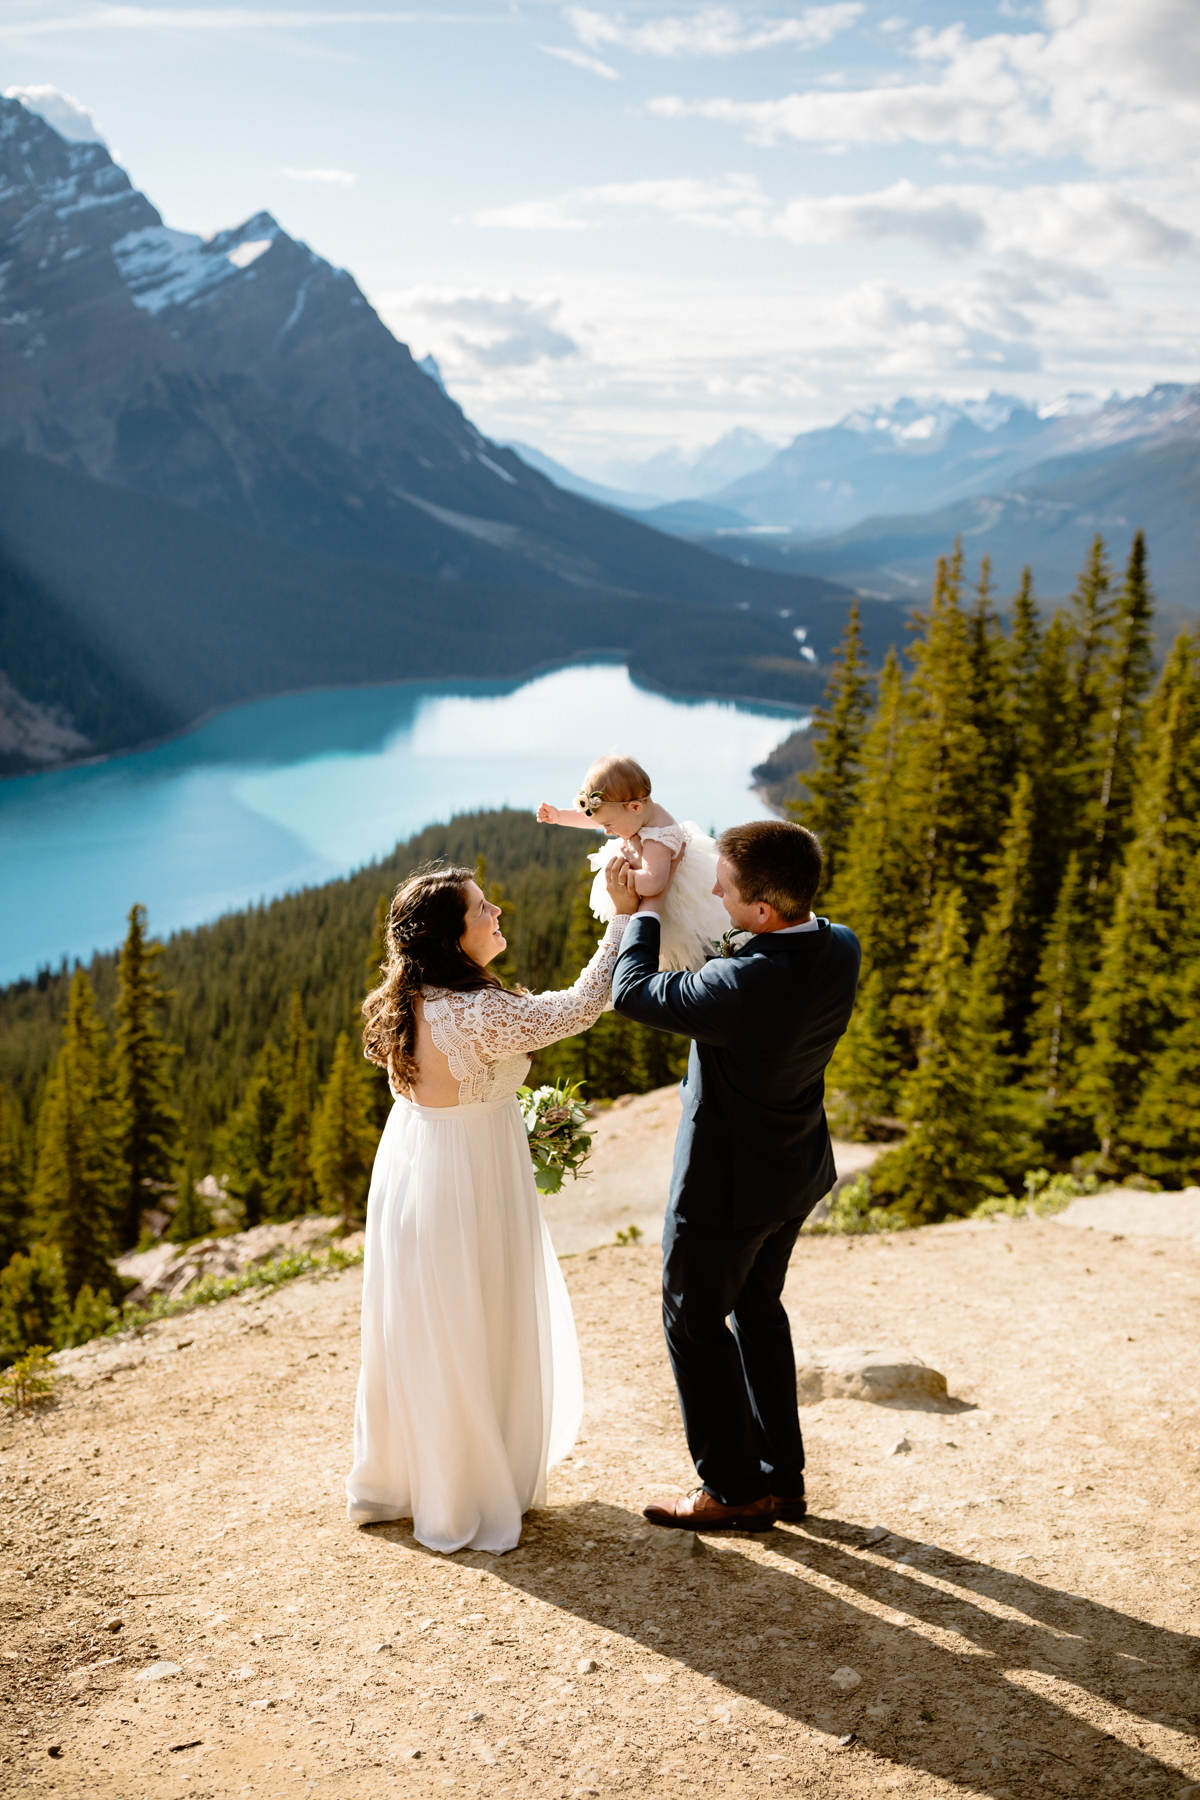 Vow Renewal Photography in Banff - Image 16